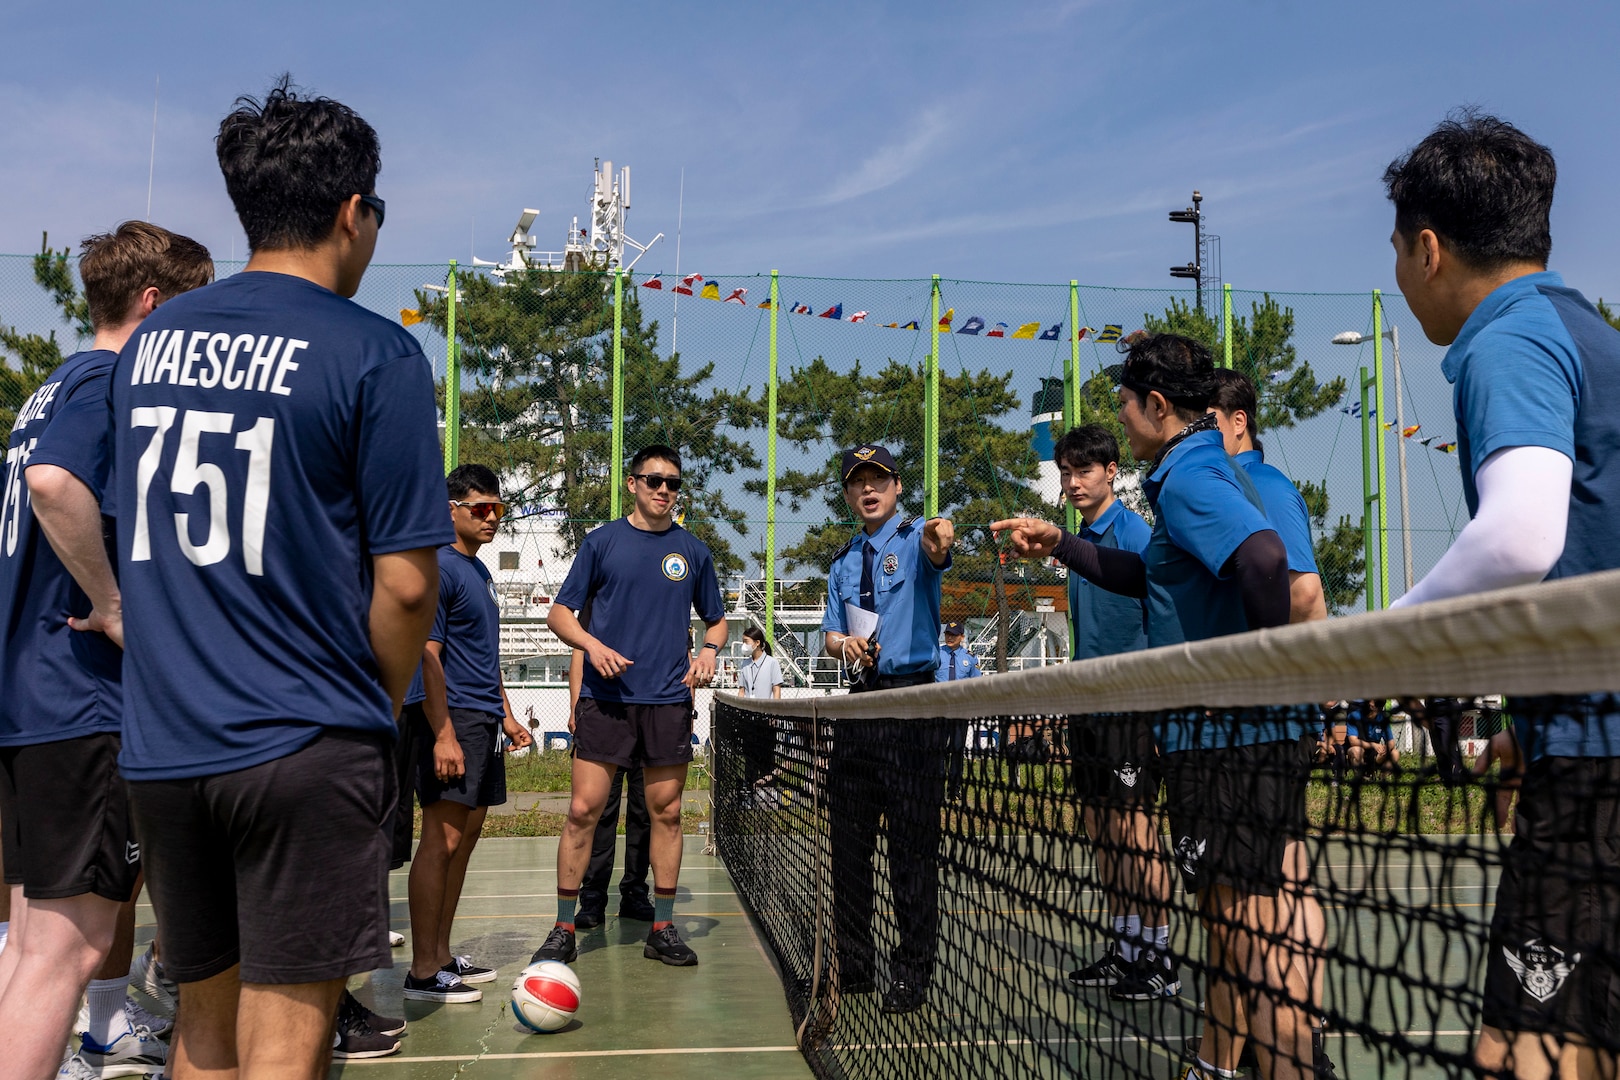 A member of the Korea Coast Guard explains the rules of jokgu to members of the U.S. Coast Guard assigned to the U.S. Coast Guard Cutter Waesche (WMSL-751) before a match during a sports day in Pohang, Republic of Korea, June 10, 2024. Korea Coast Guardsmen explained the rules and demonstrated how to play jokgu to United States Coast Guardsmen before participating in a friendly competition. Waesche is the second U.S. Coast Guard National Security Cutter deployed to the Indo-Pacific in 2024. Coast Guard cutters routinely deploy to the region to engage with partner nations to ensure a free and open Indo-Pacific. (U.S. Marine Corps photo by Cpl. Elijah Murphy)